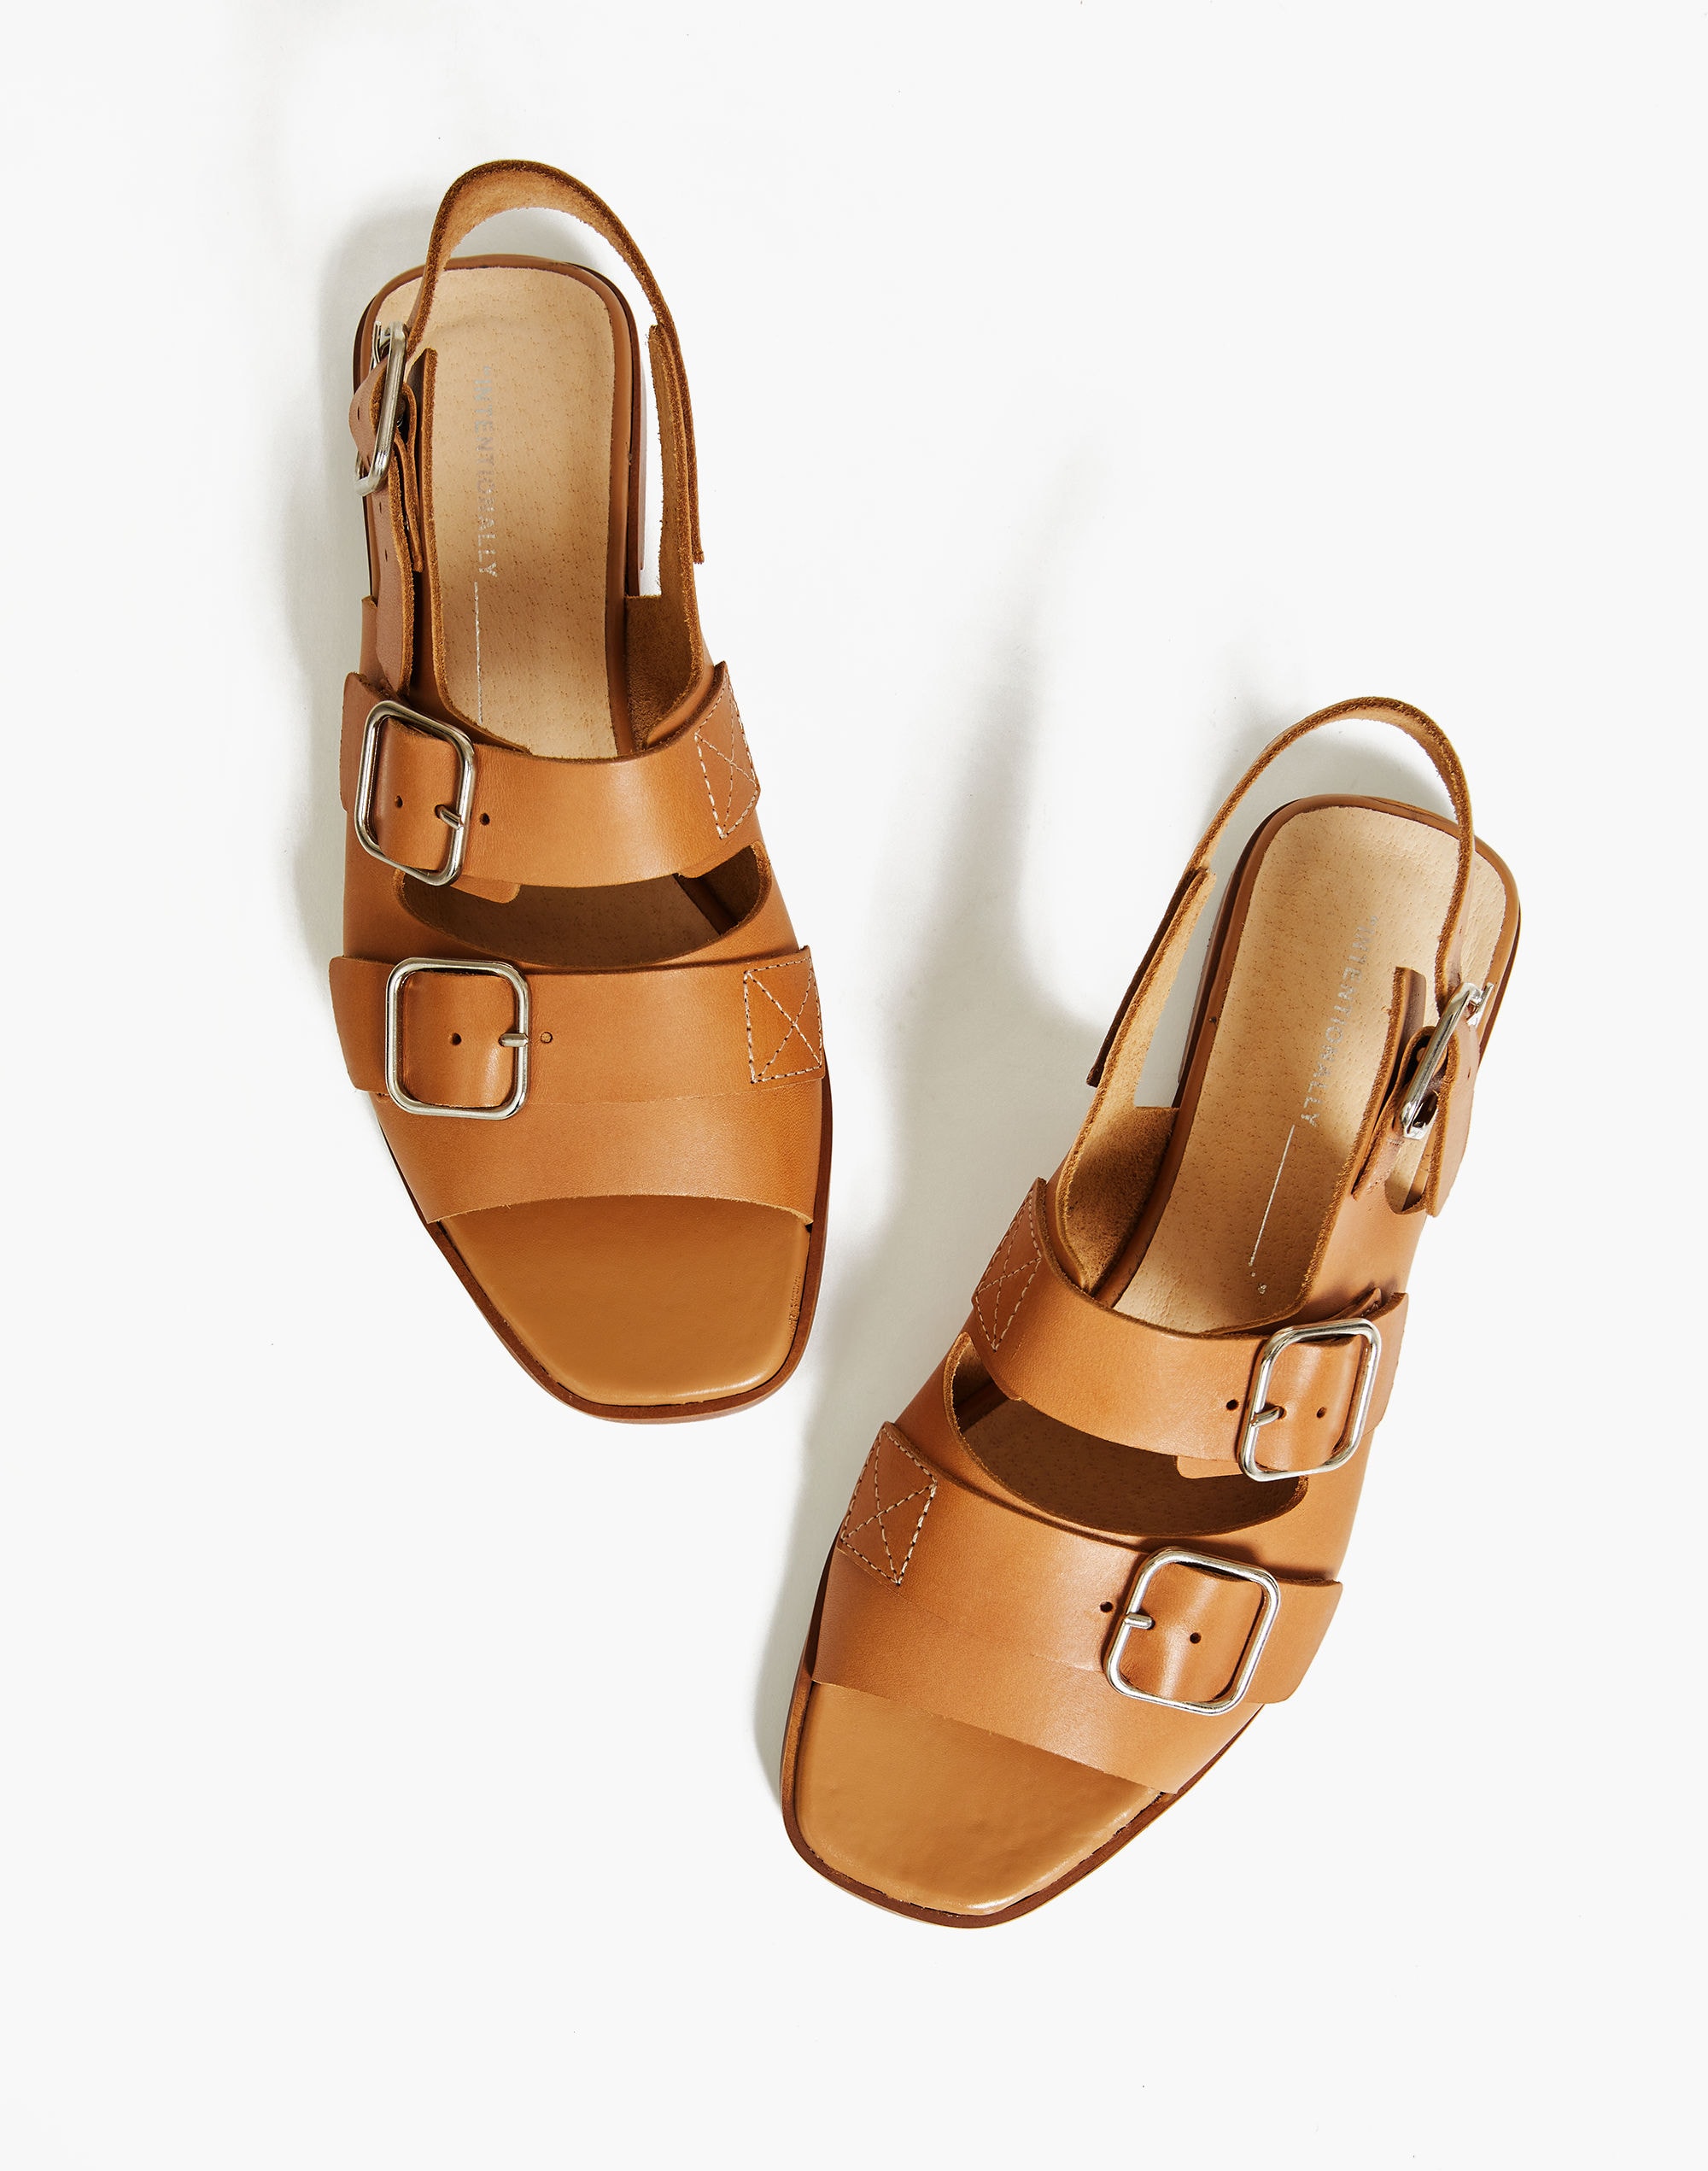 Intentionally Blank Leather Jiji Sandals in Tan